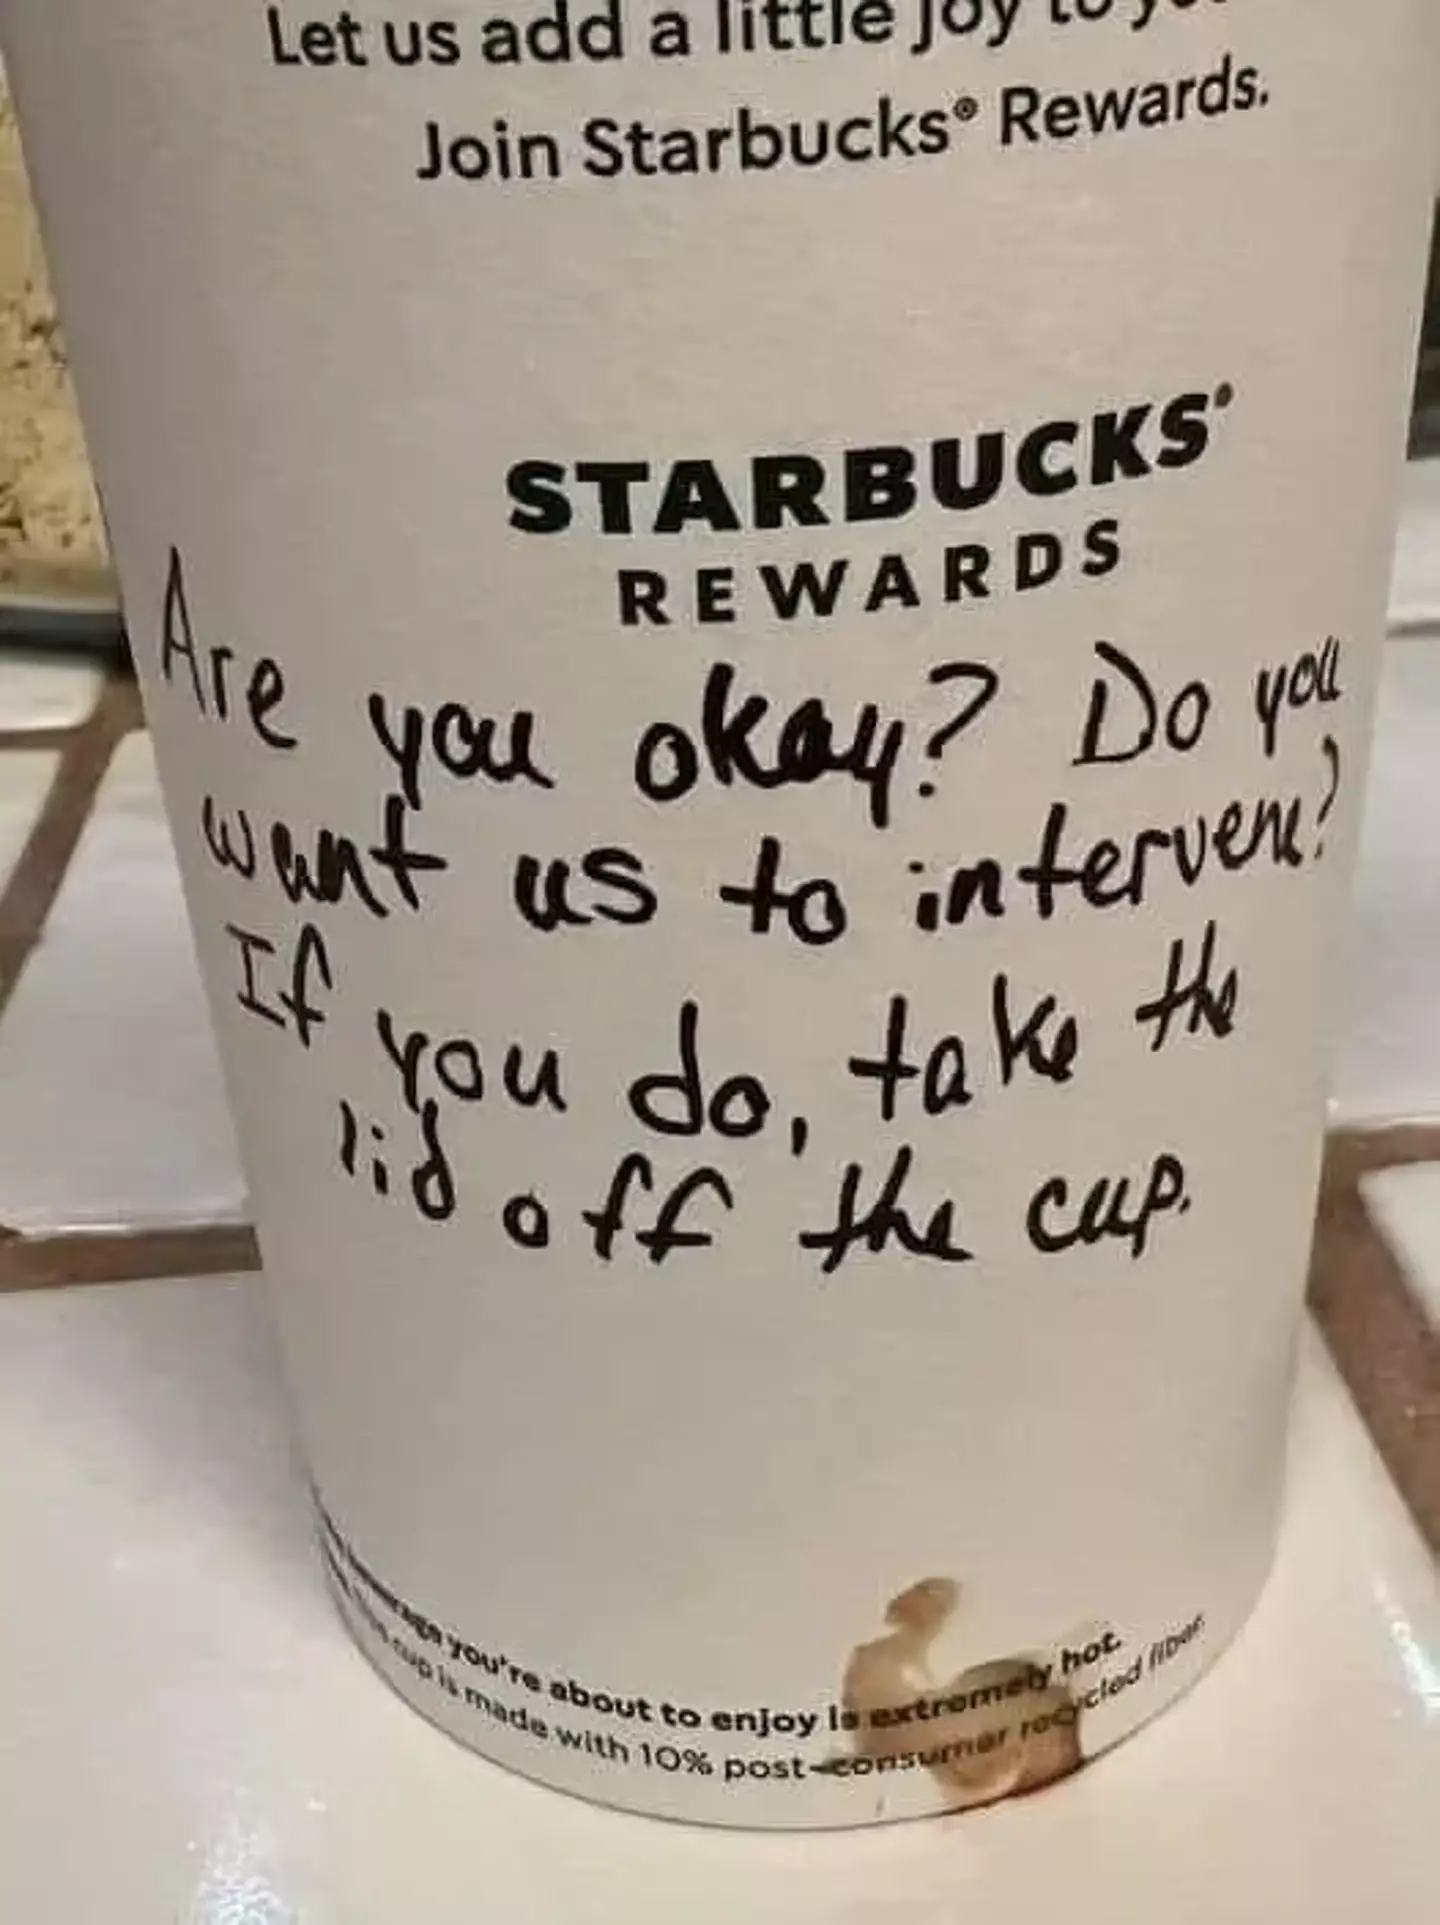 The internet rushed in to congratulate the Starbucks barista for the message.